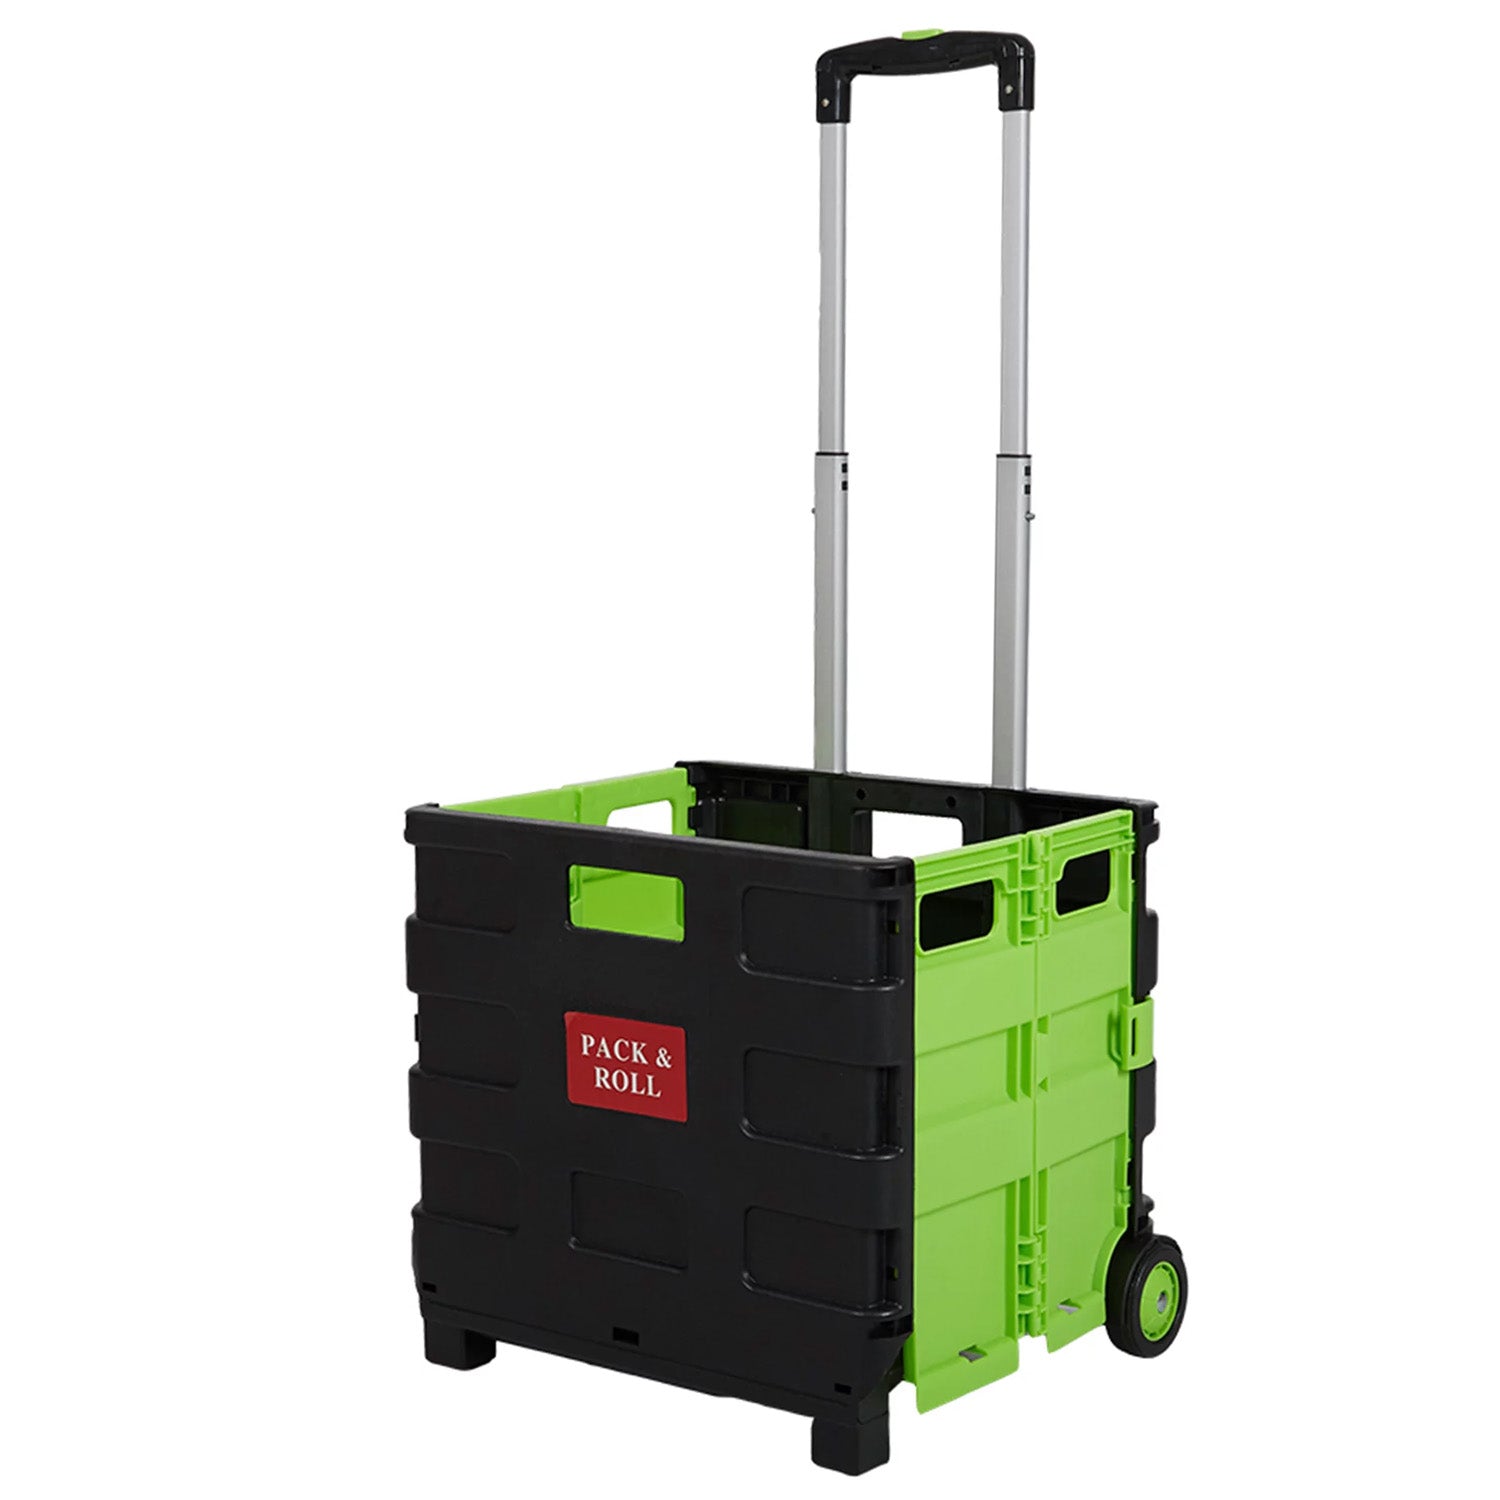 LUCKYERMORE 55lbs Collapsible Rolling Crate Transit Utility Cart Foldable Grocery Cart with Wheels, Green